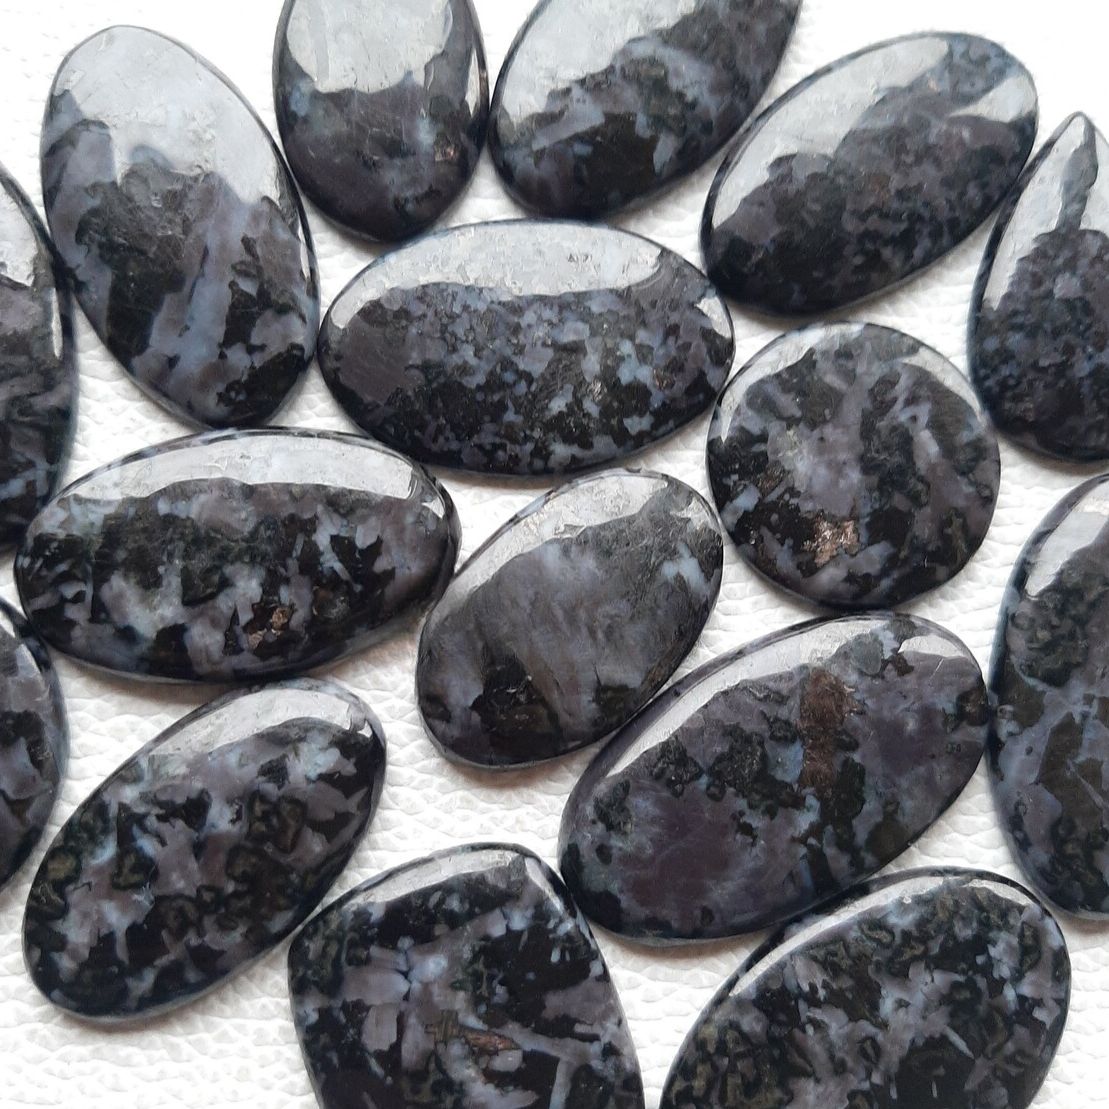 Wholesale Lot of Gabbro Jasper Cabochon By Weight With Different Shapes And Sizes Used For Jewelry Making (Natural)